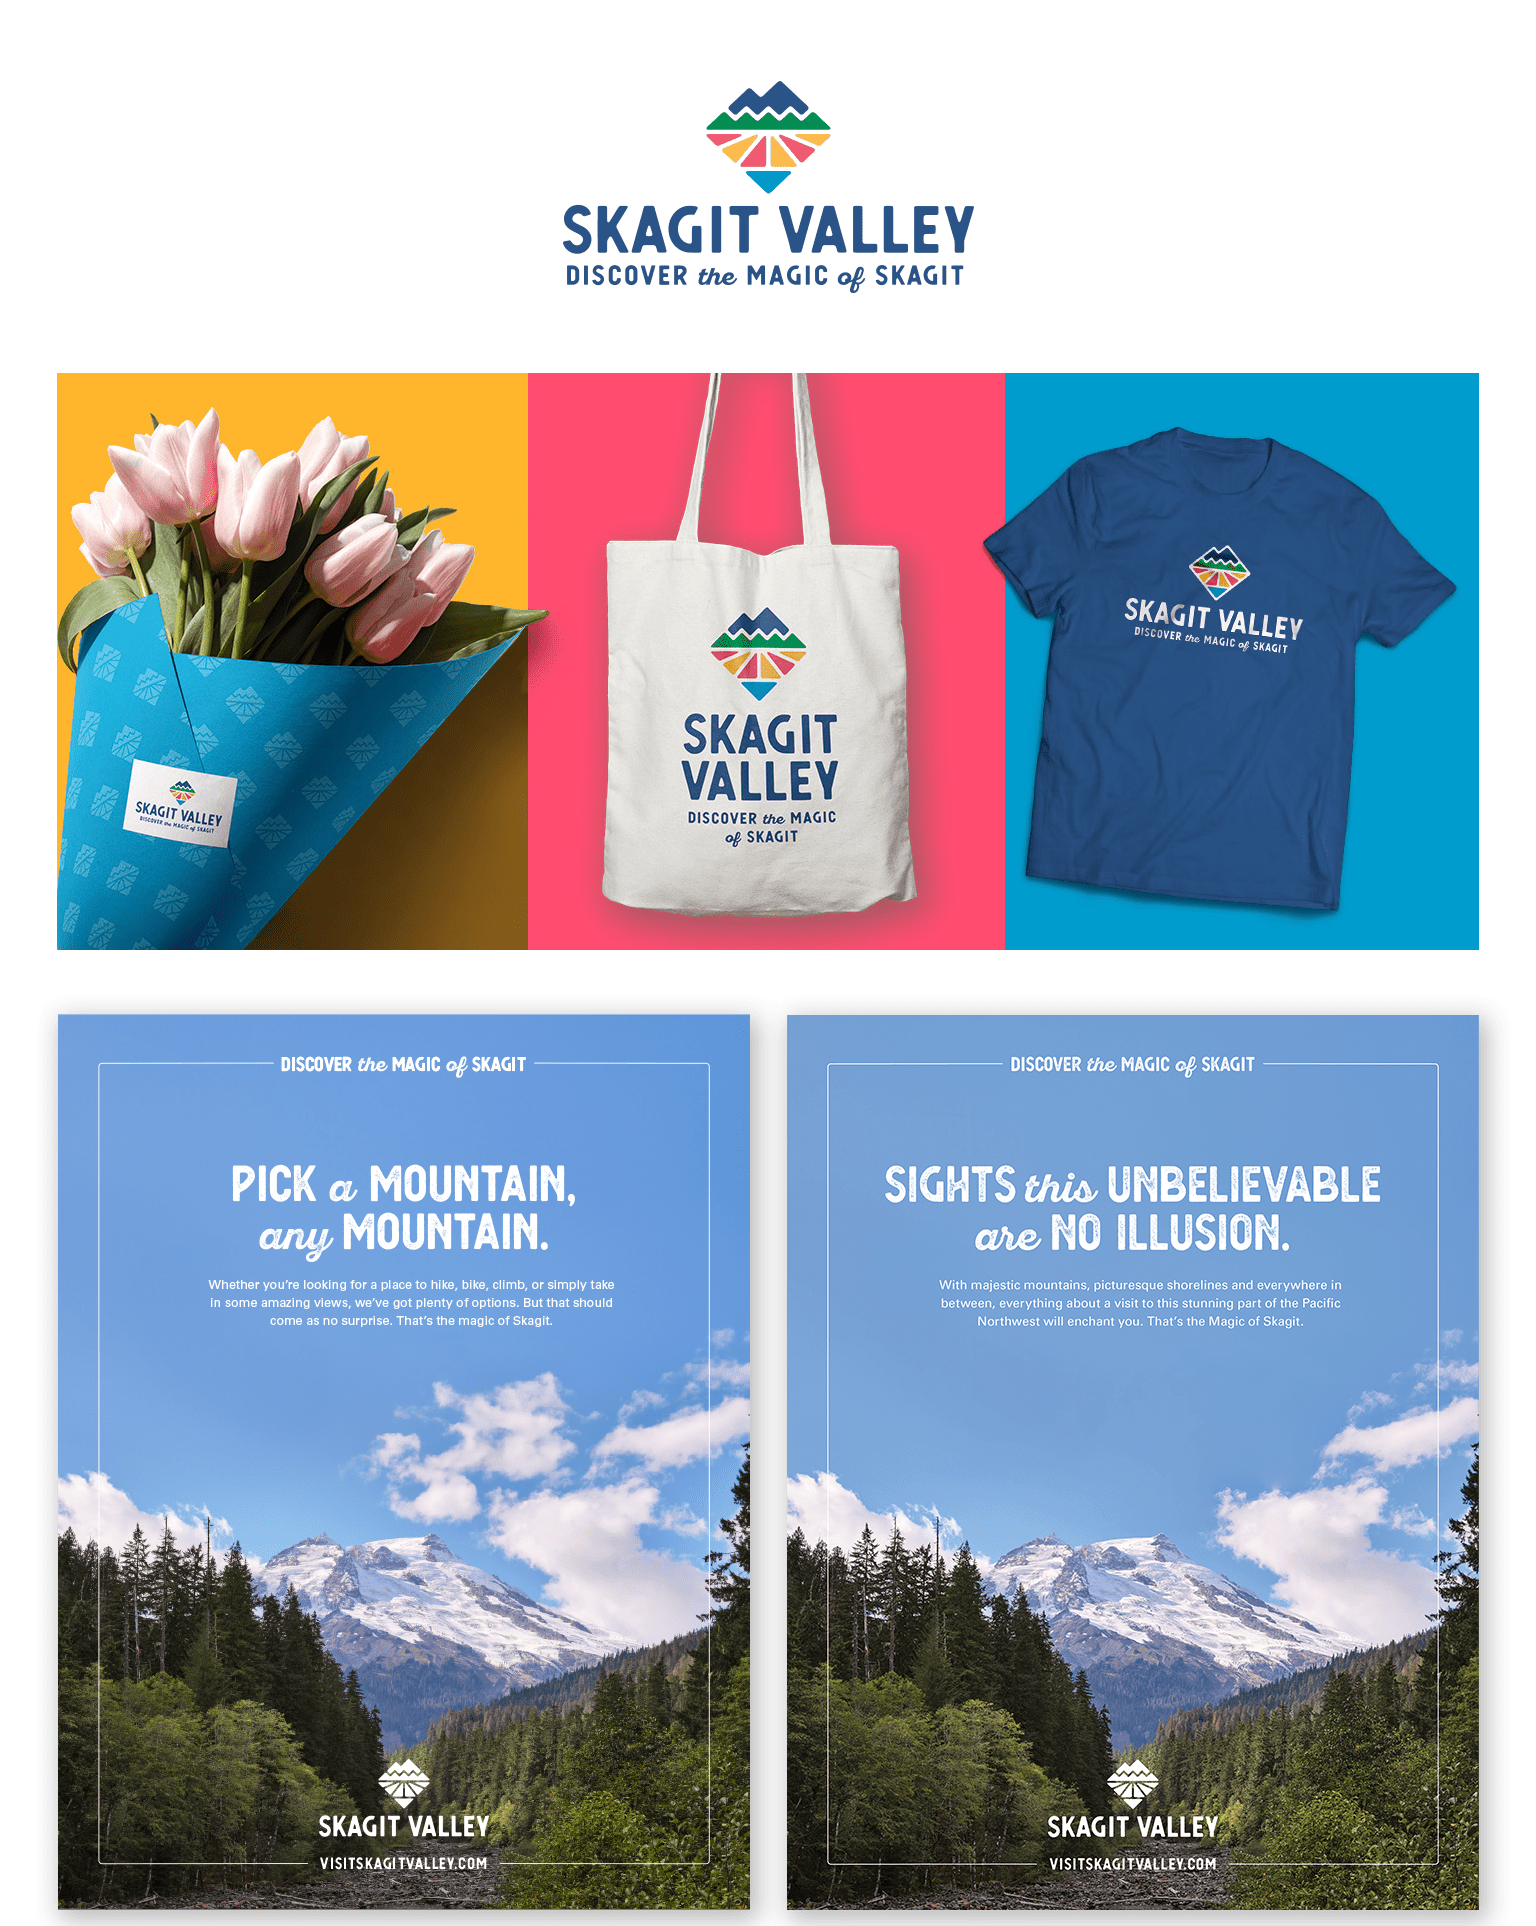 Skagit Valley case study with logo, mockup and print ads